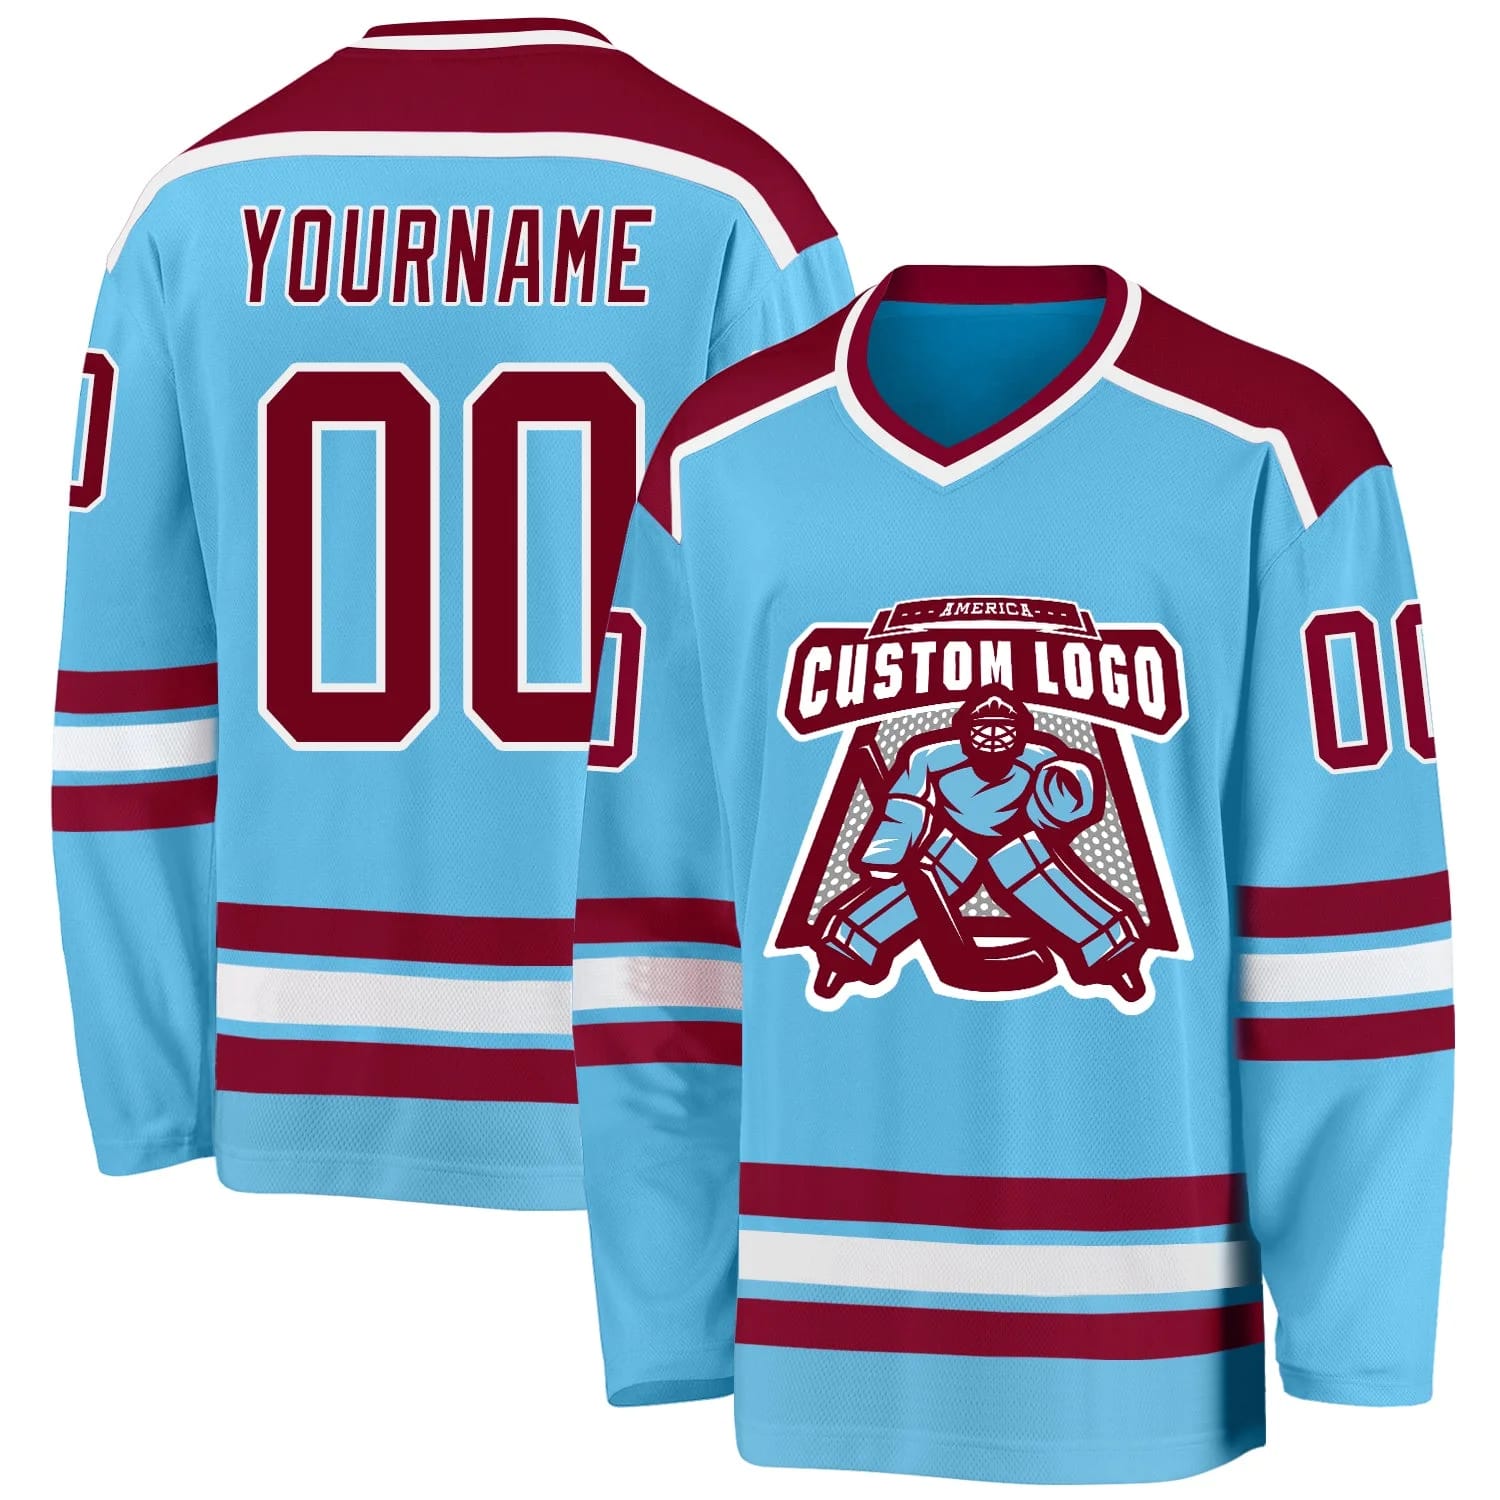 Stitched And Print Sky Blue Maroon-white Hockey Jersey Custom